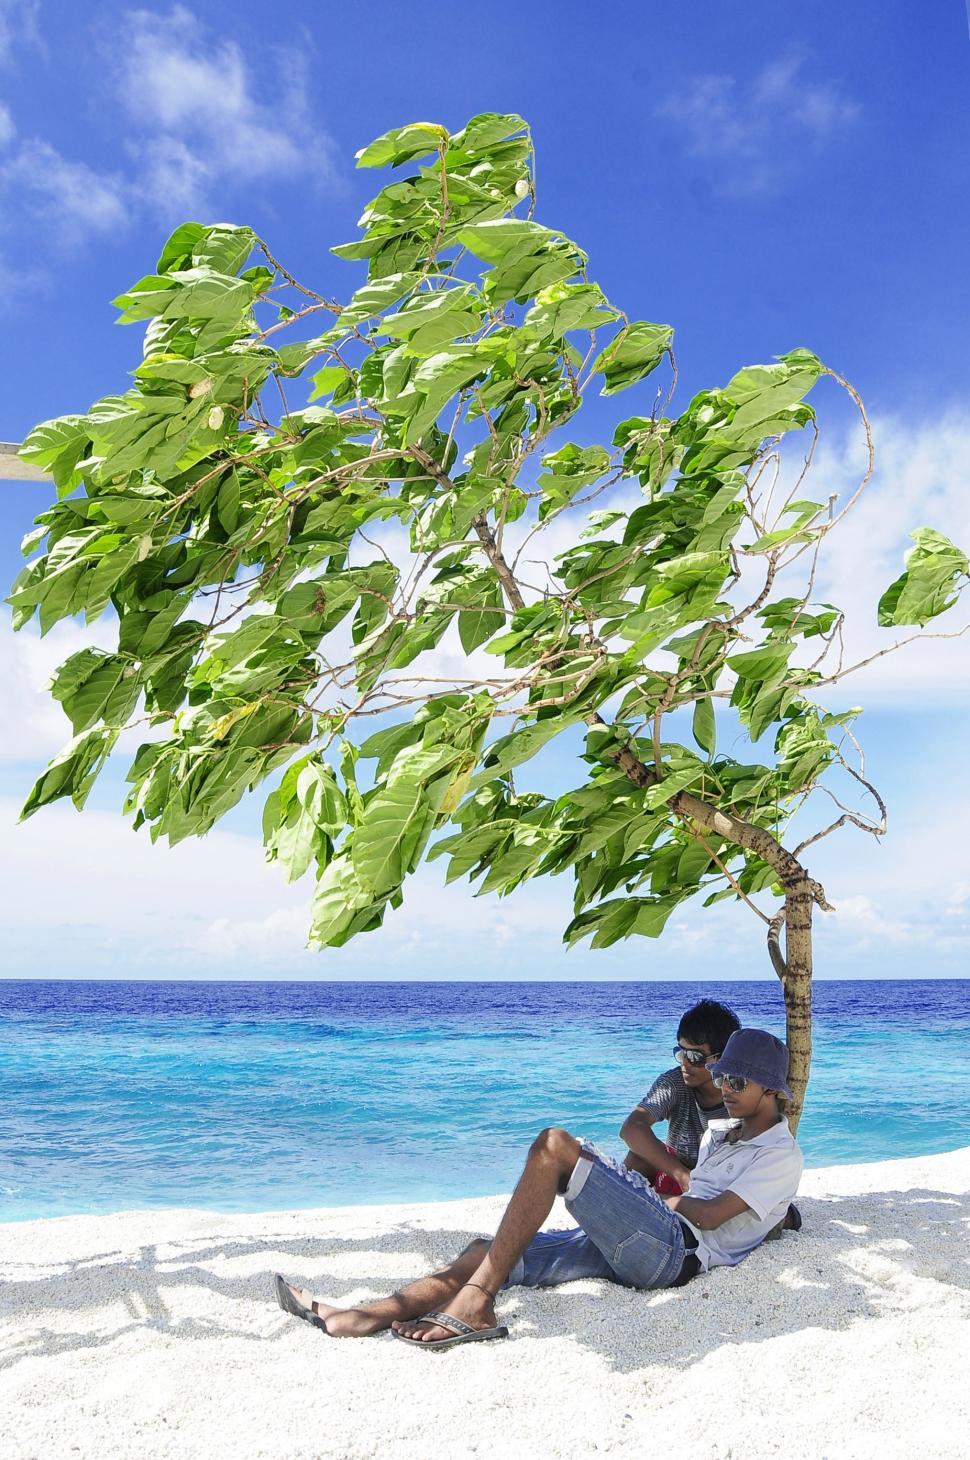 Free Image of Two Men sitting under tree on beach  